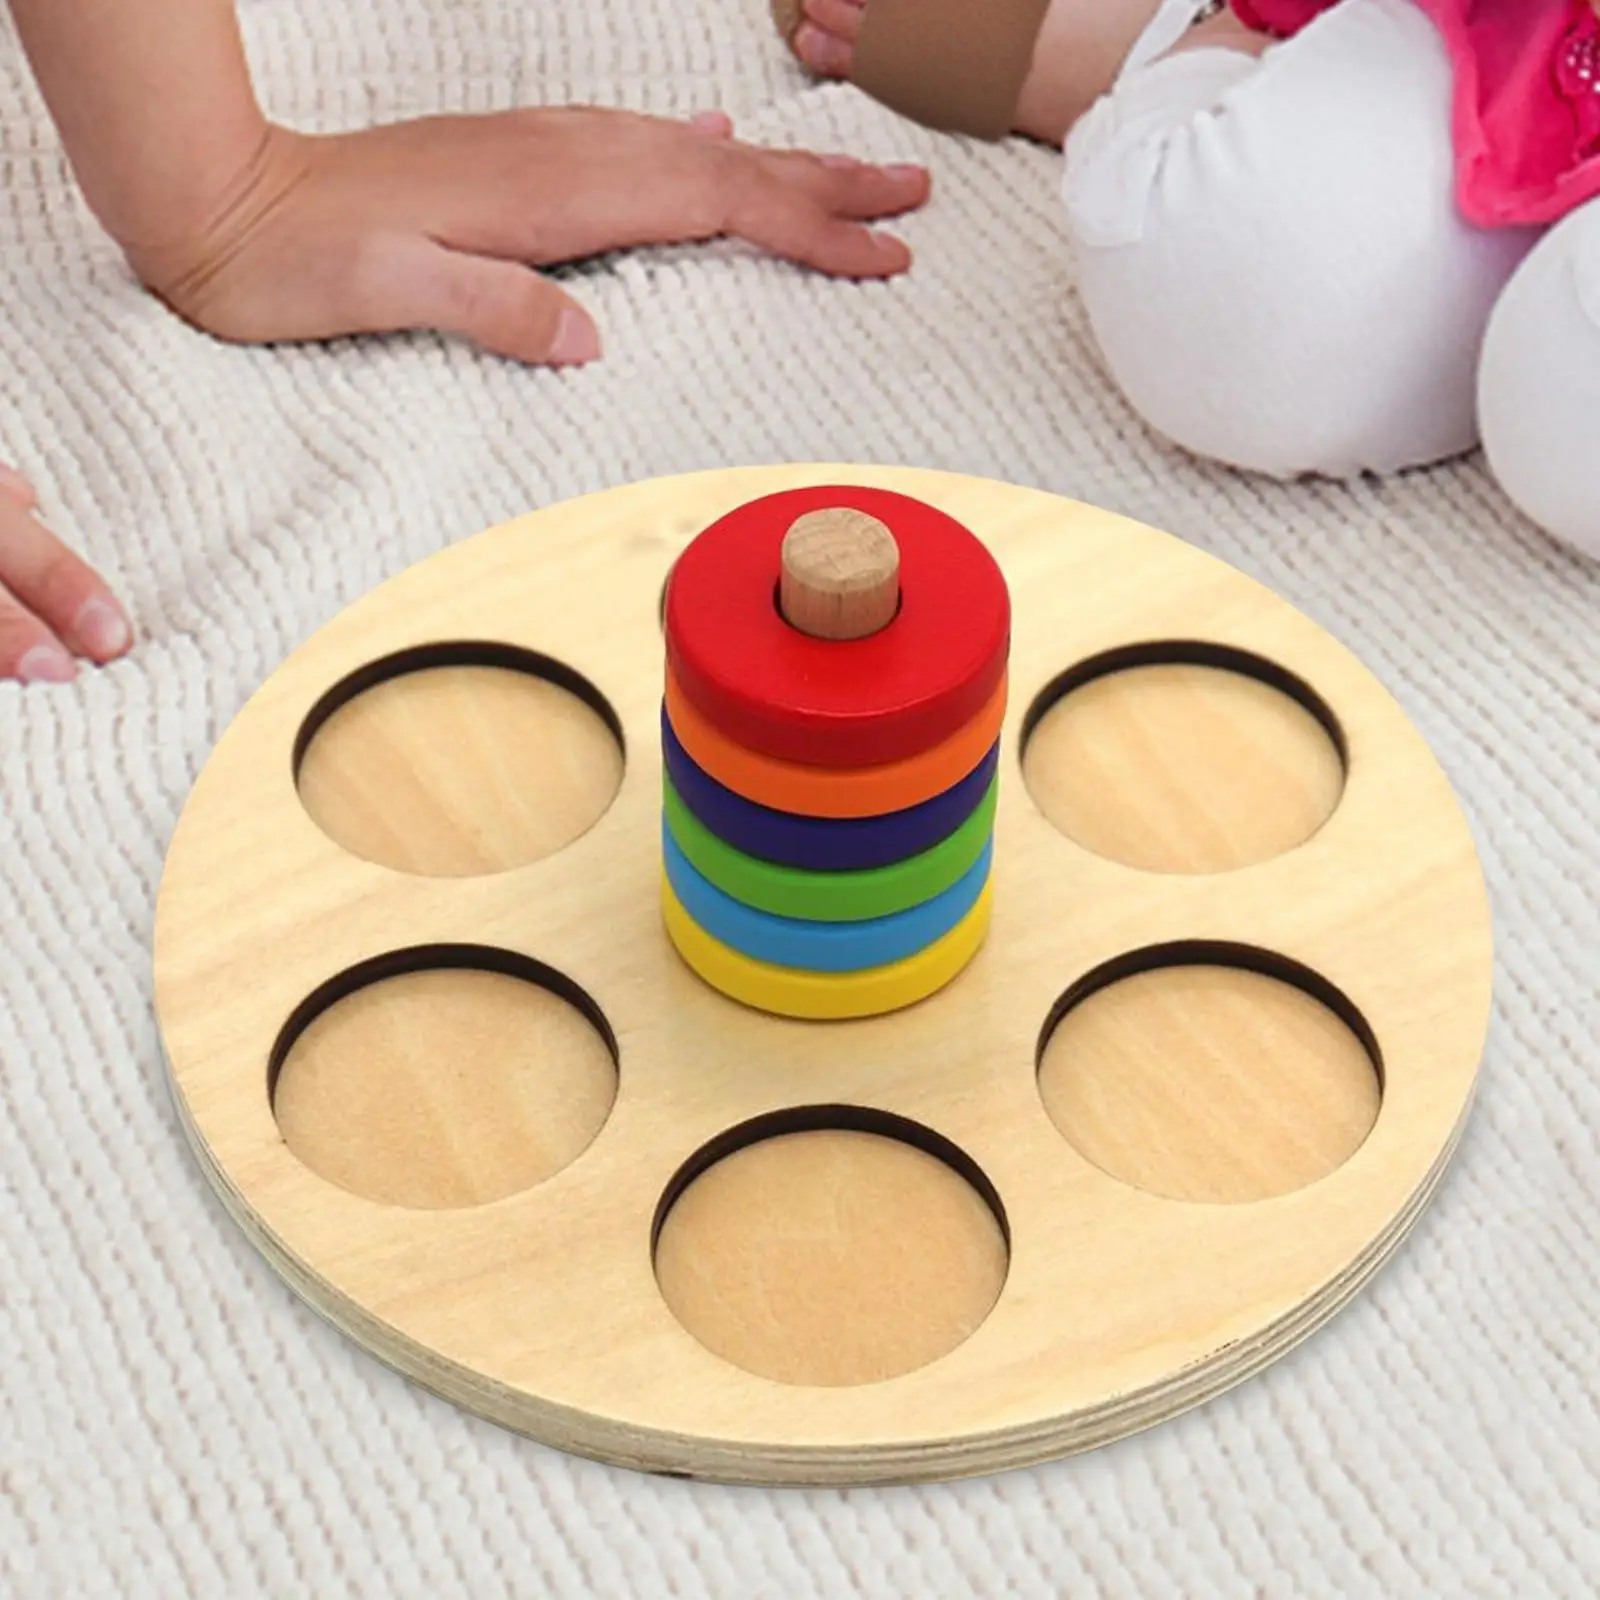 Colorful Montessori Plugging Ring Toy Educational Toy Fine Motor Skills Gift